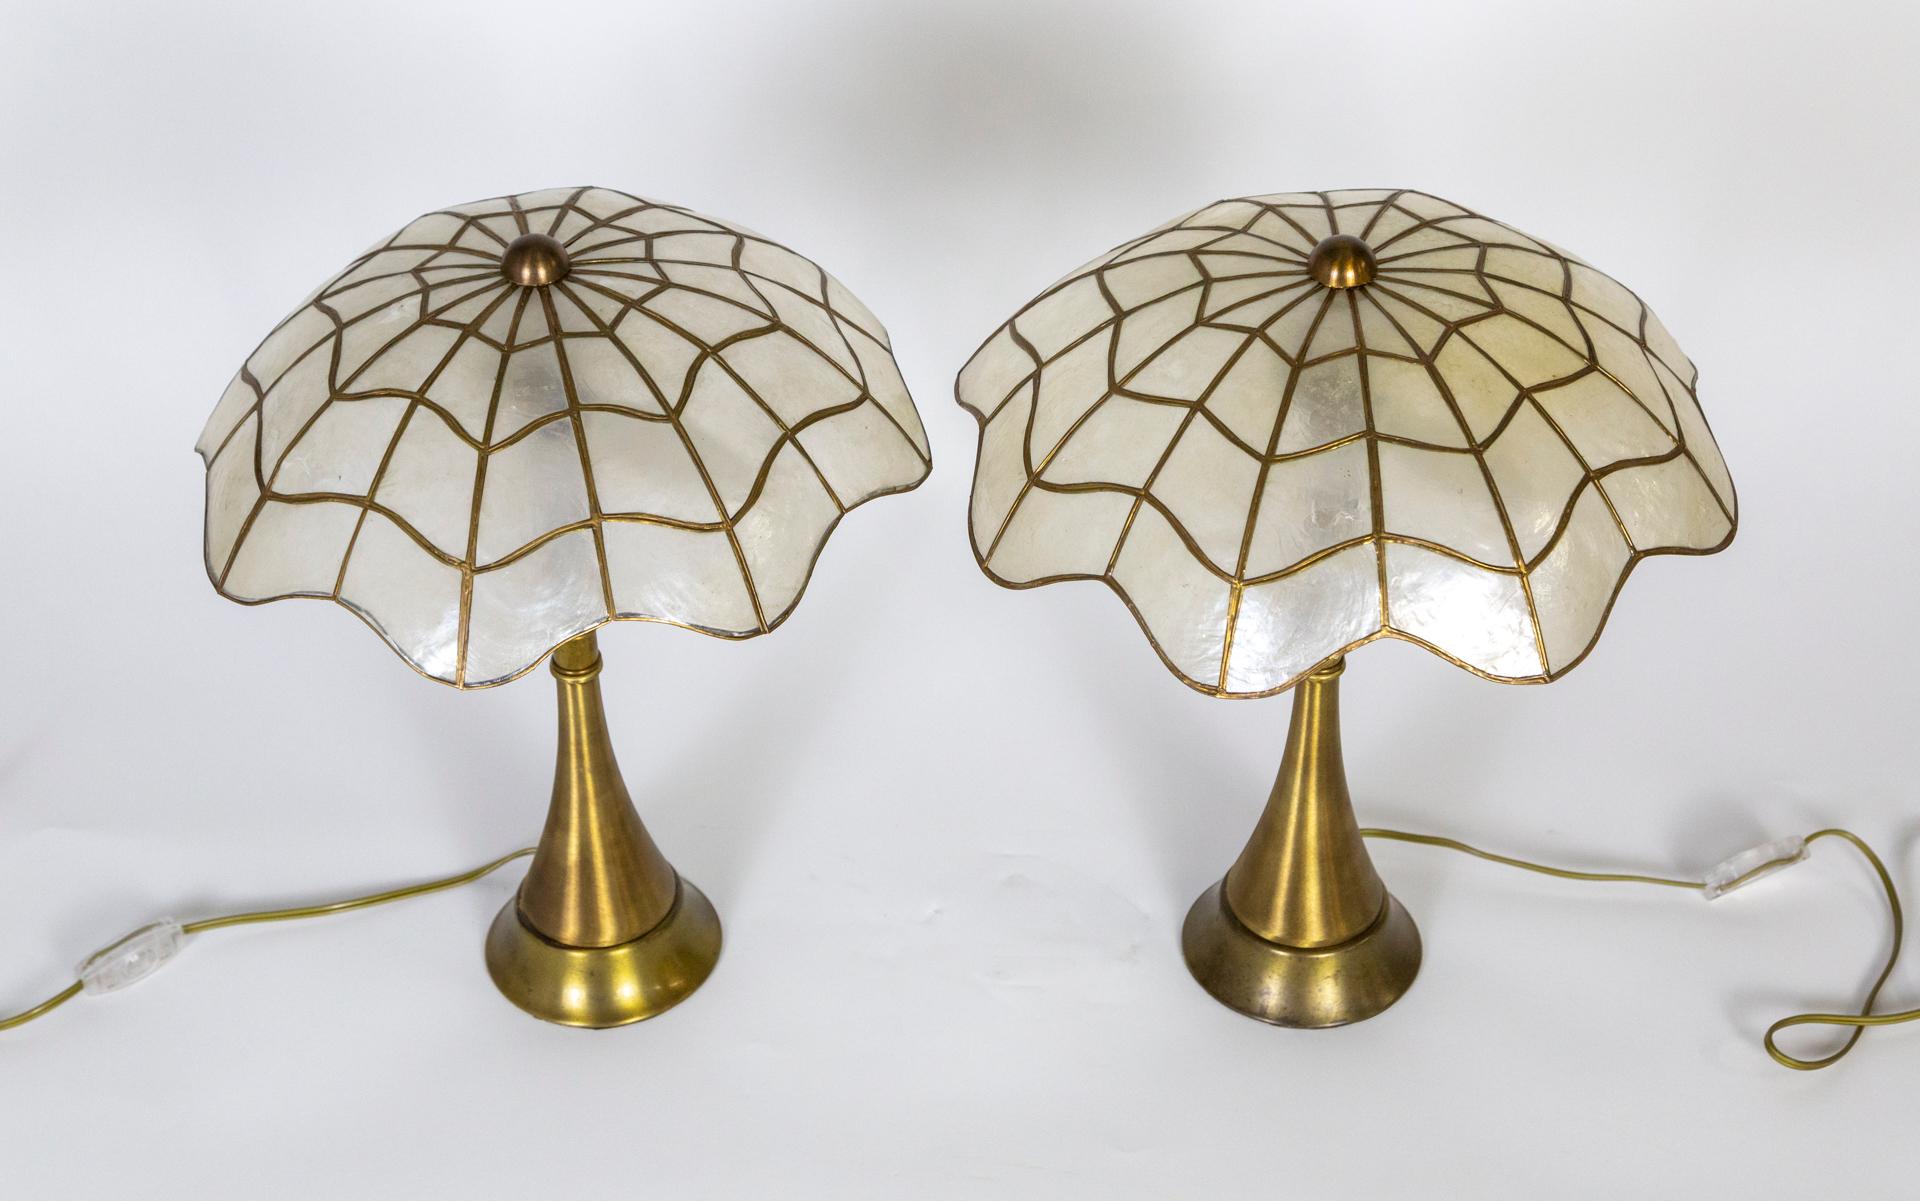 Hollywood Regency Brass Stemmed Lamps w/ Capiz Shell Umbrella Shades, Pair For Sale